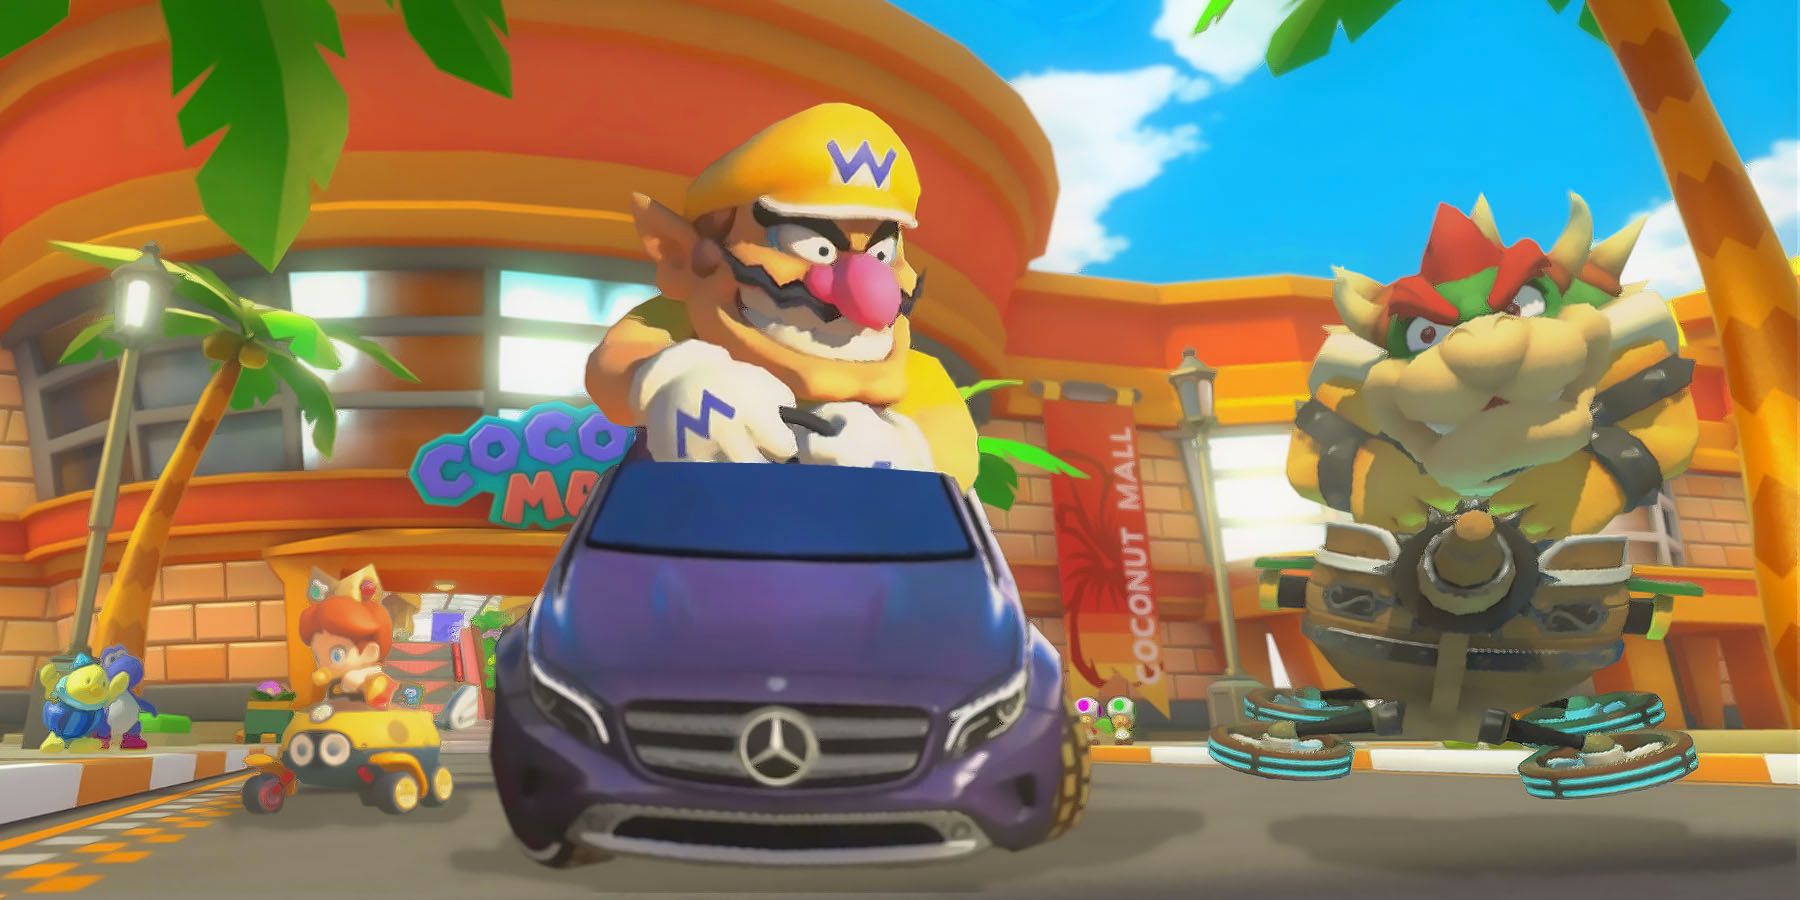 Mario Kart 8 Deluxe review: A beautiful blend of the old and new